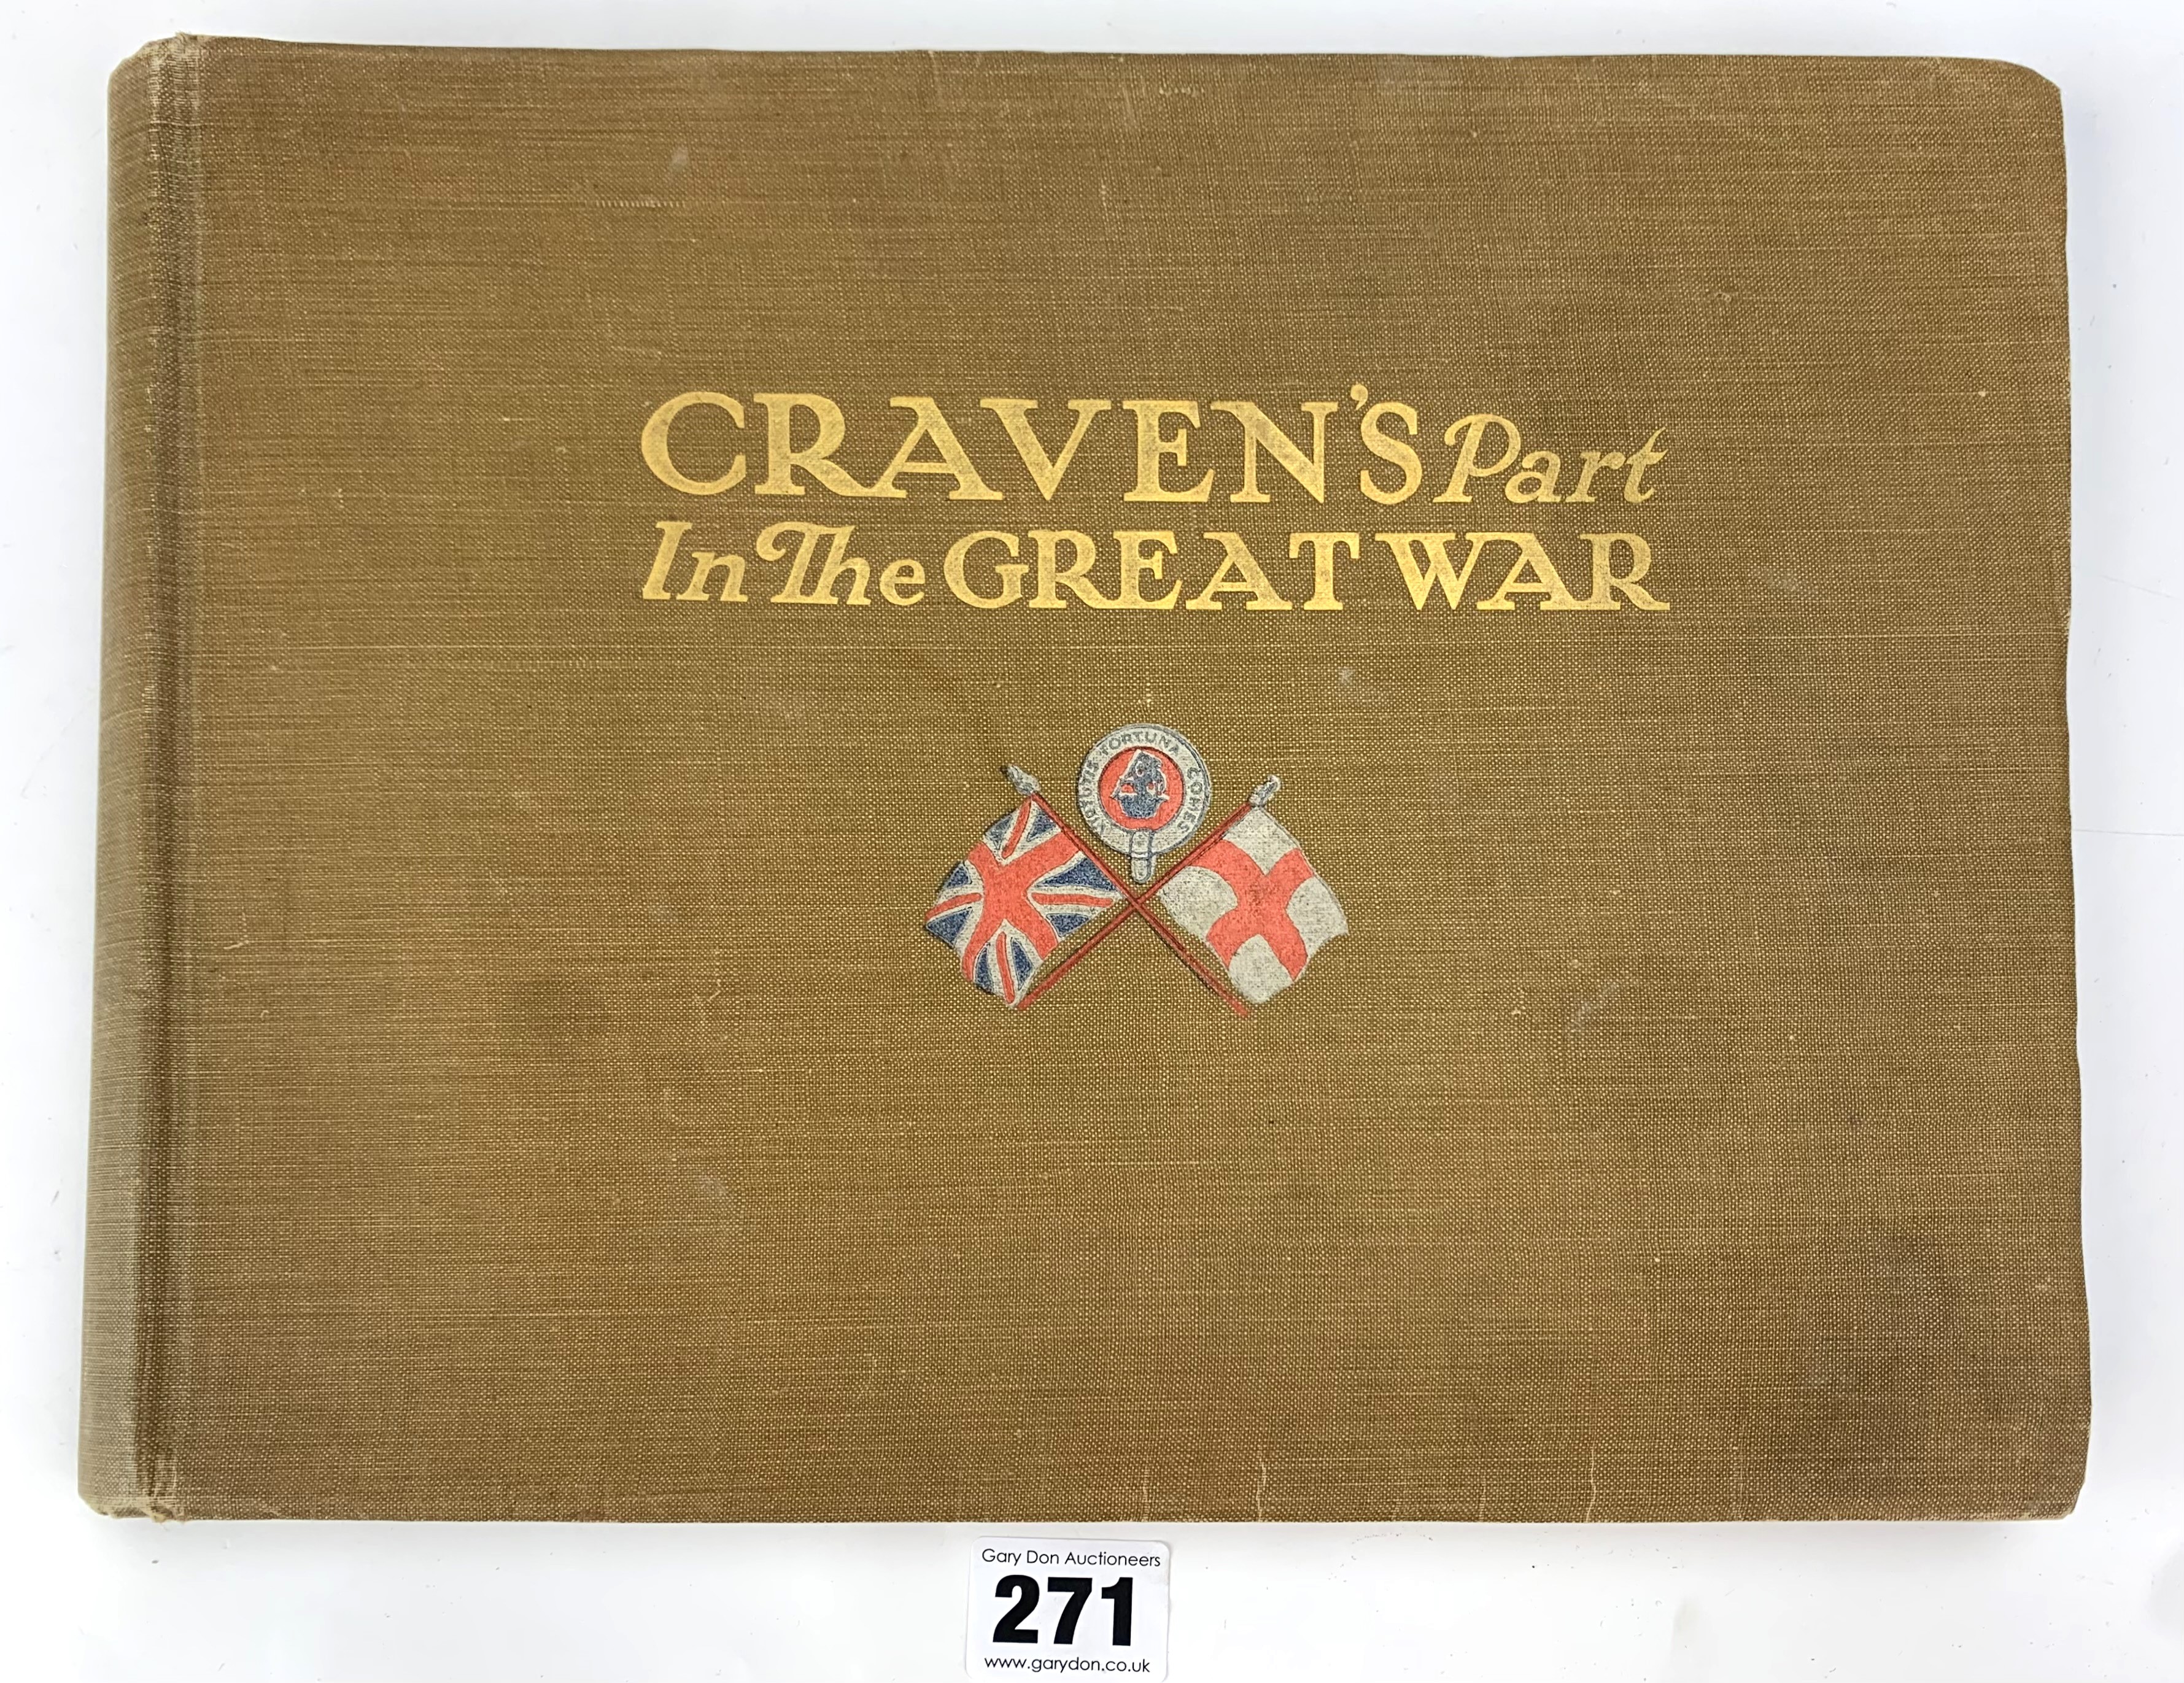 Craven's Part in the Great War book